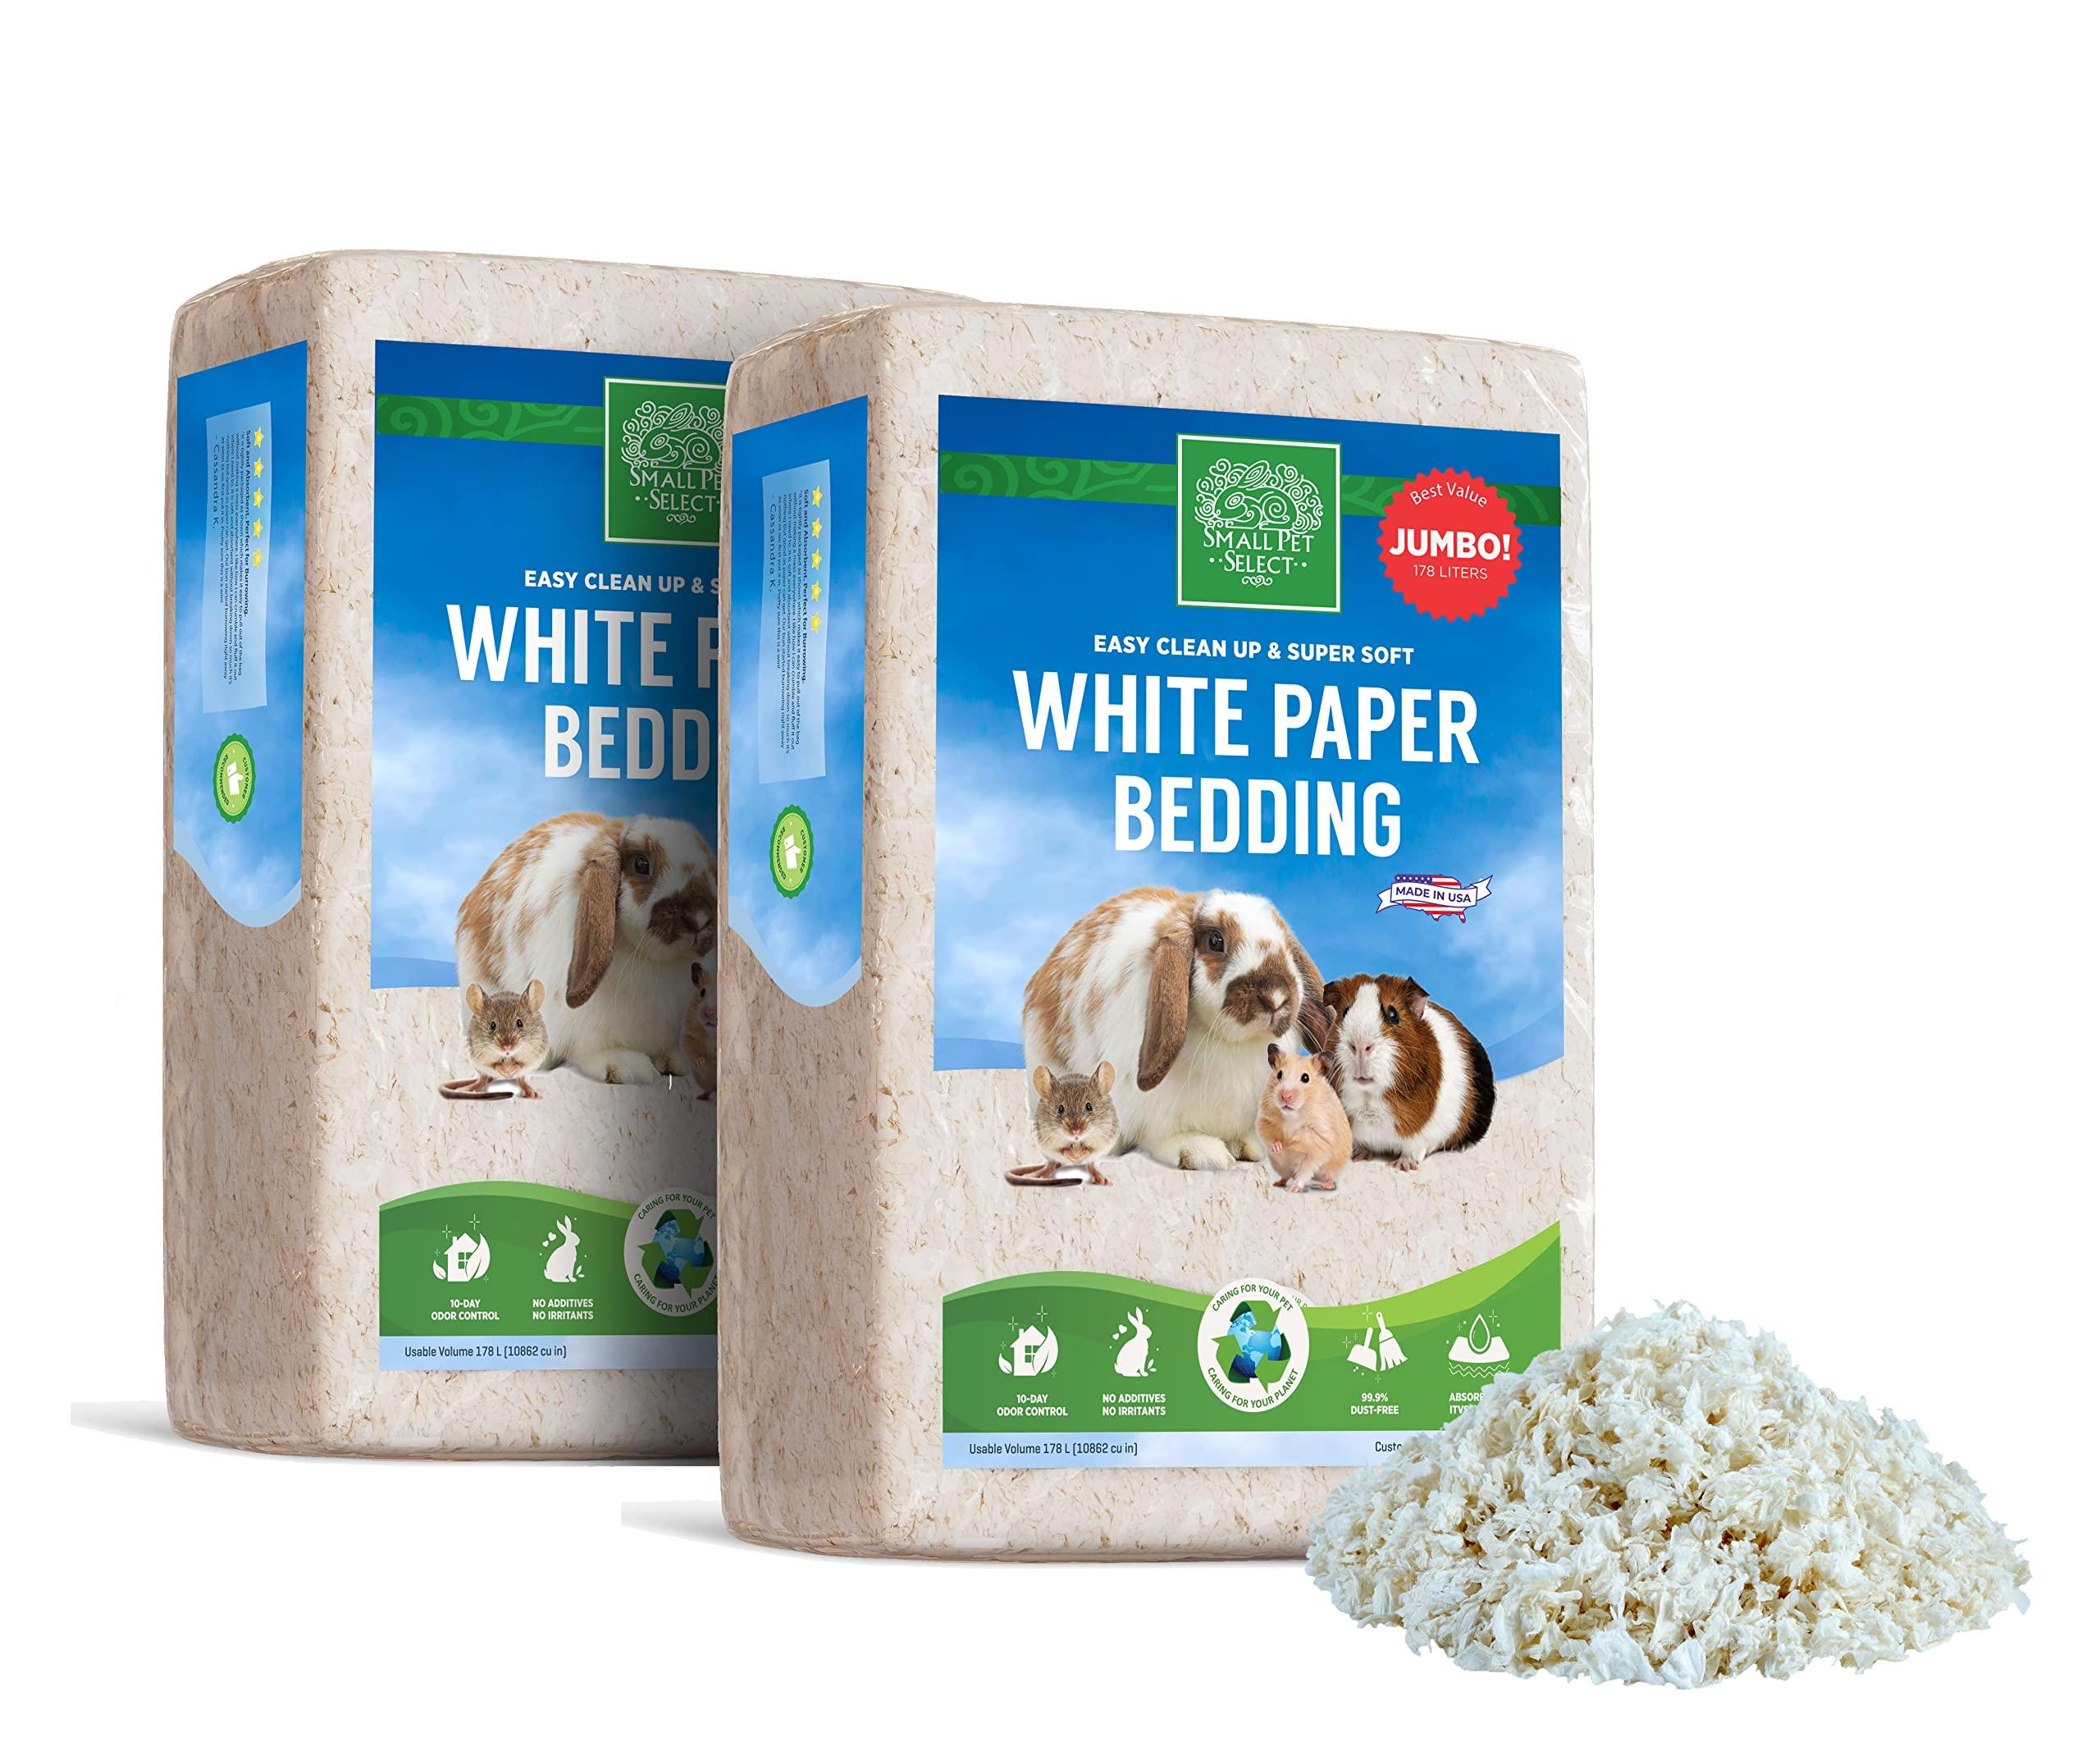 Small Pet Select - Jumbo White 2-Pack Paper Bedding, 356L. Soft, Unbleached, Sustainable, Rabbits Guinea Pigs, Small Animals